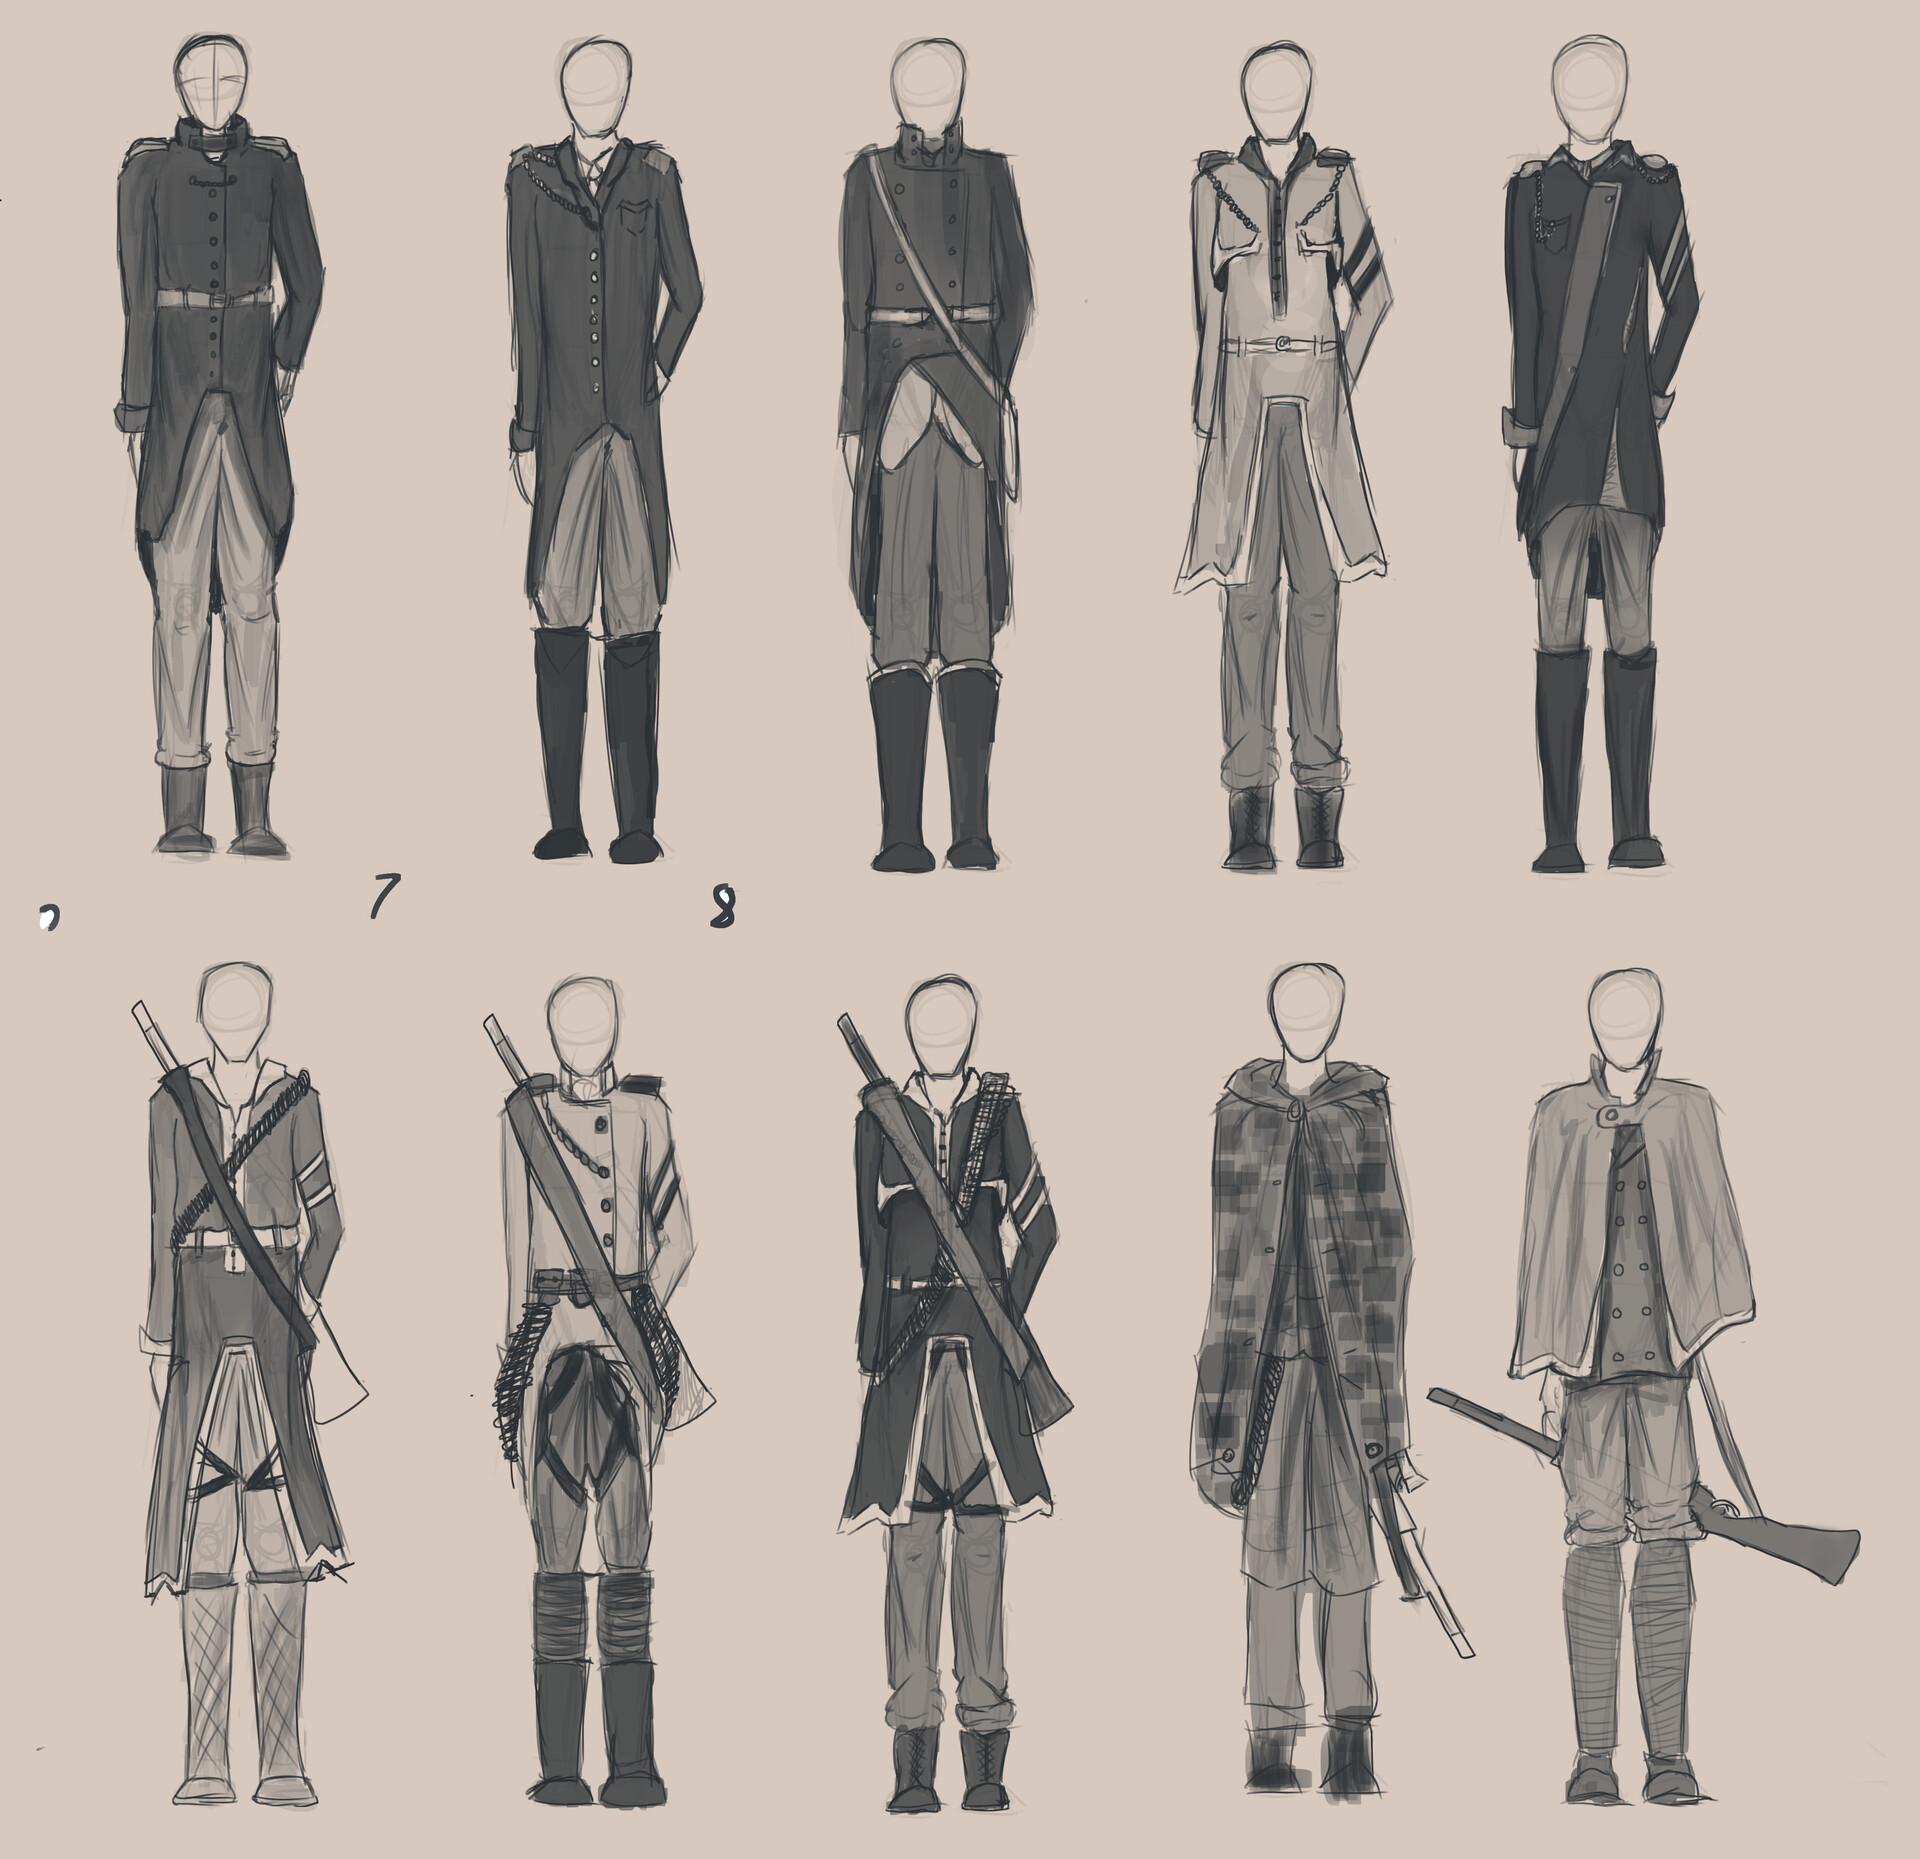 ArtStation - Character clothes ideas and sketch of final choice